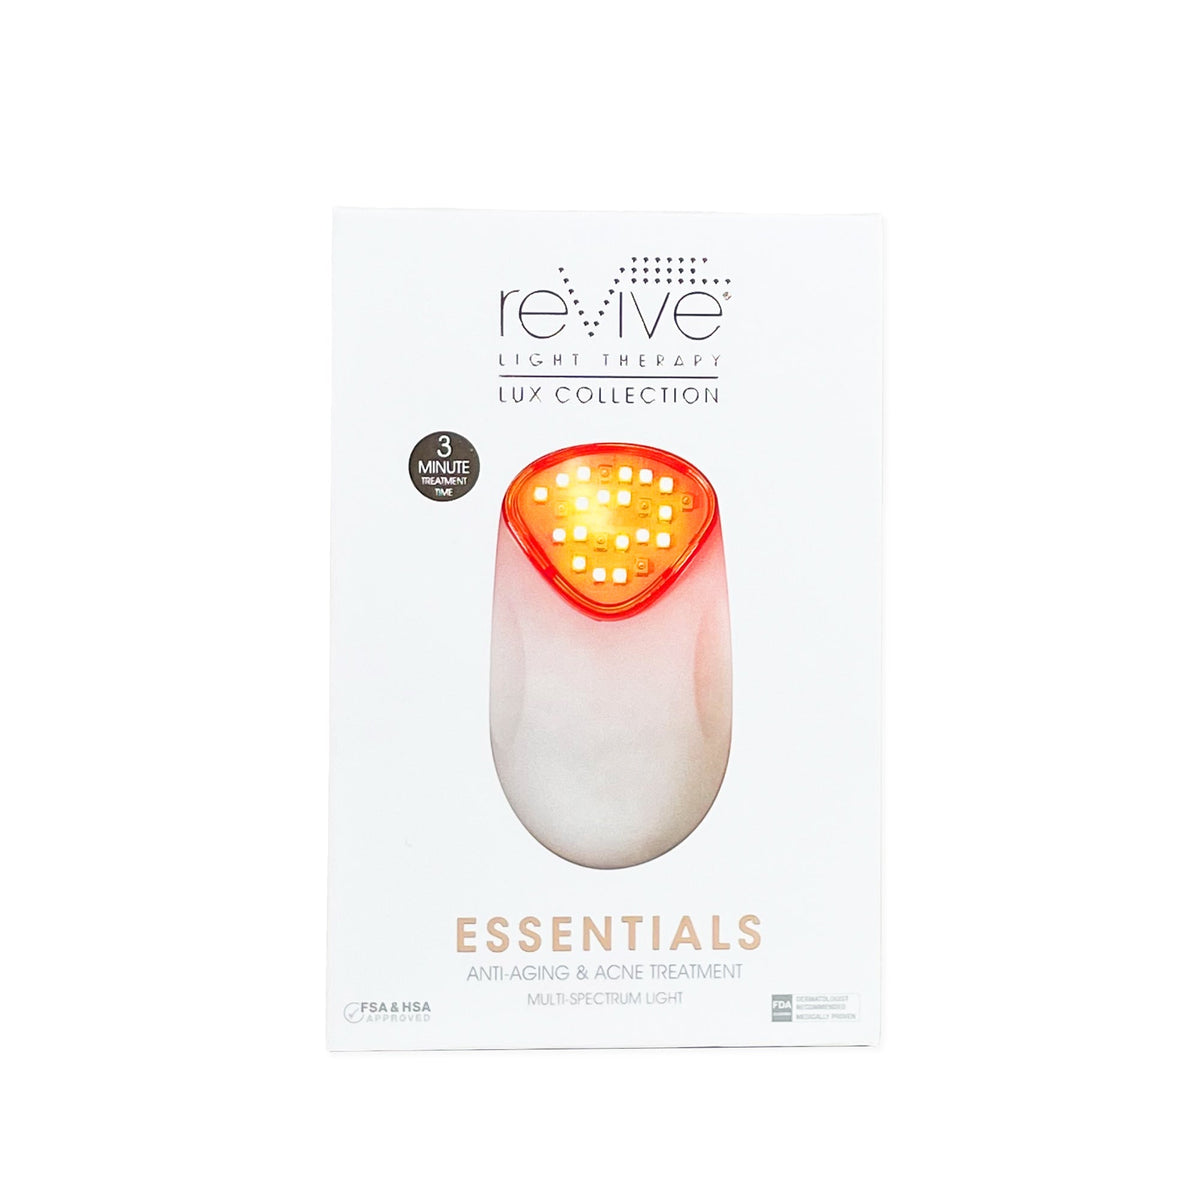 Lux Essentials Series LED, Wrinkle Reduction & Acne Treatment by reVive Light Therapy